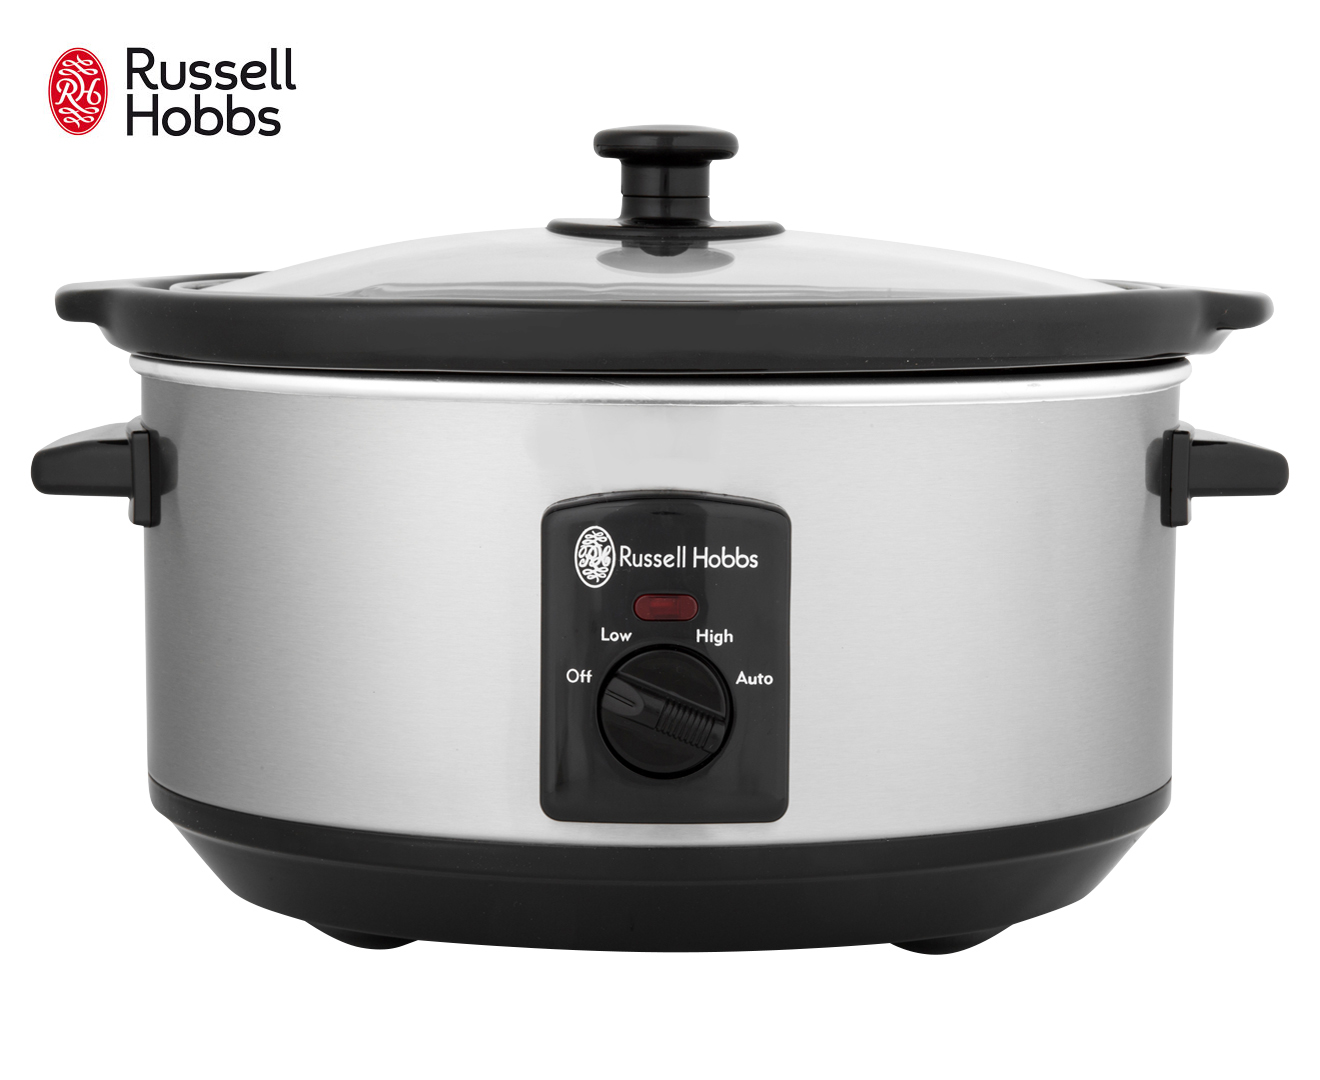 Russell Hobbs 3.5L Slow Cooker - Silver/Black